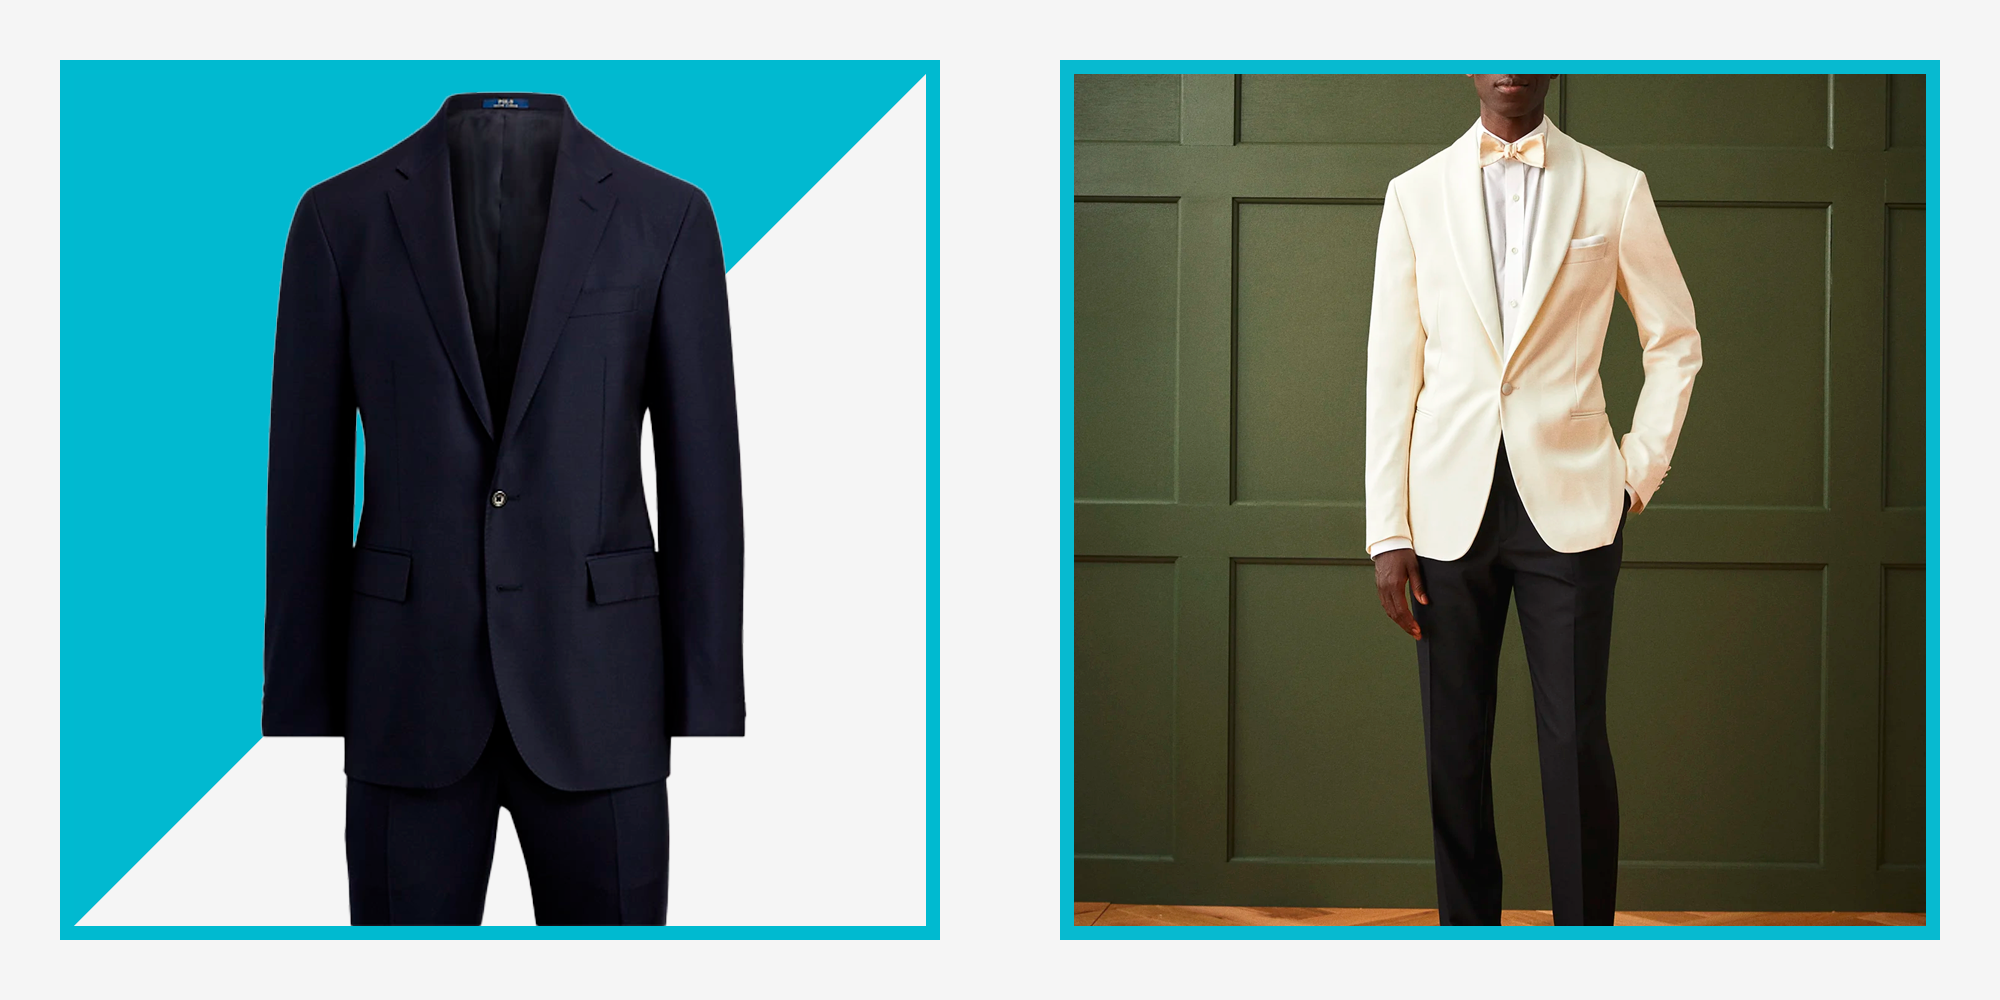 The five styles of suit jackets